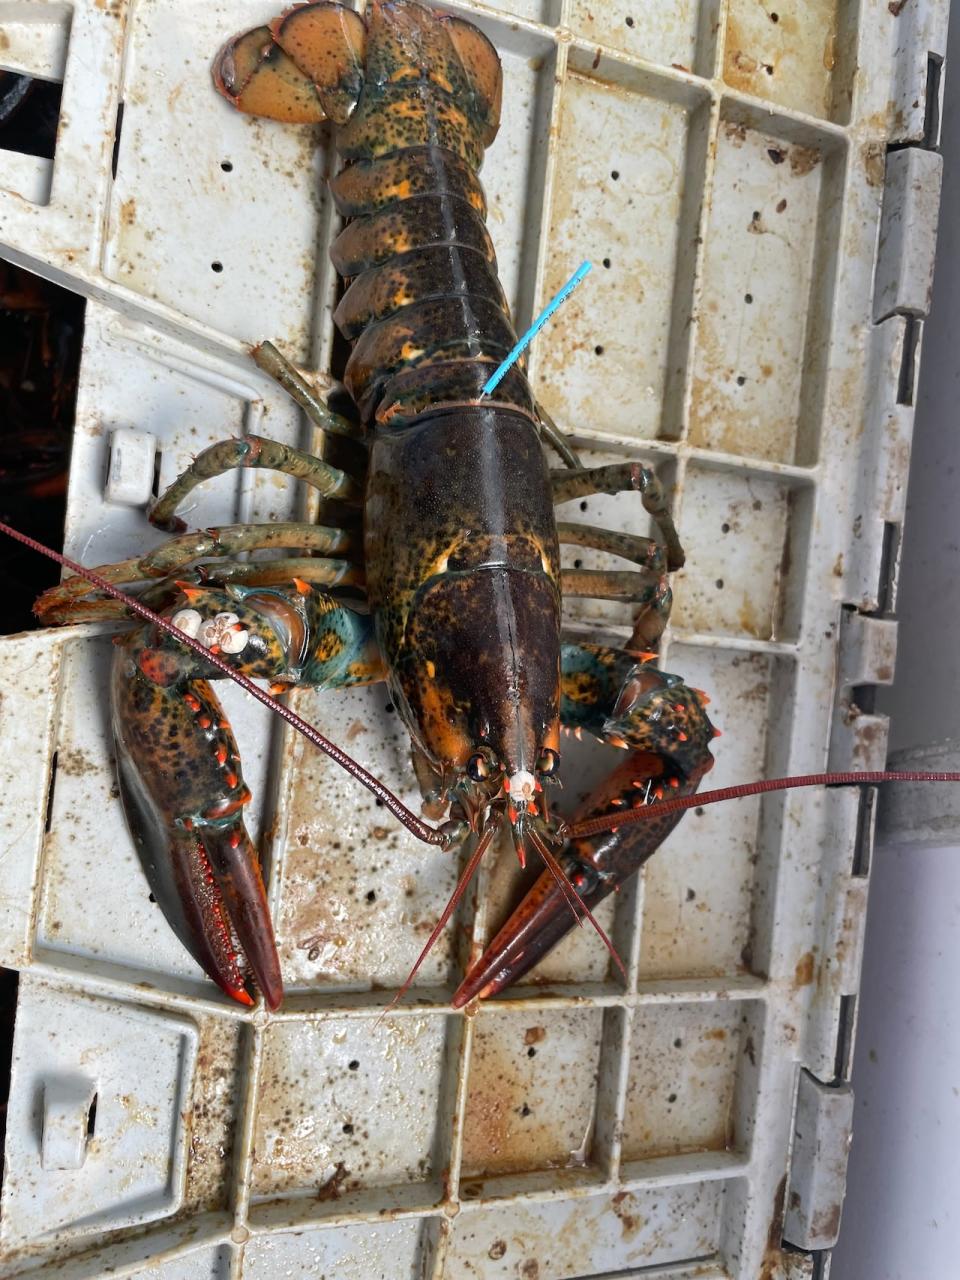 The UNB researchers have tagged about 2,250 so far, through lobster fishing area 36 on the New Brunswick side of the Bay of Fundy. The zone spans from Saint Martins to Deer Island.